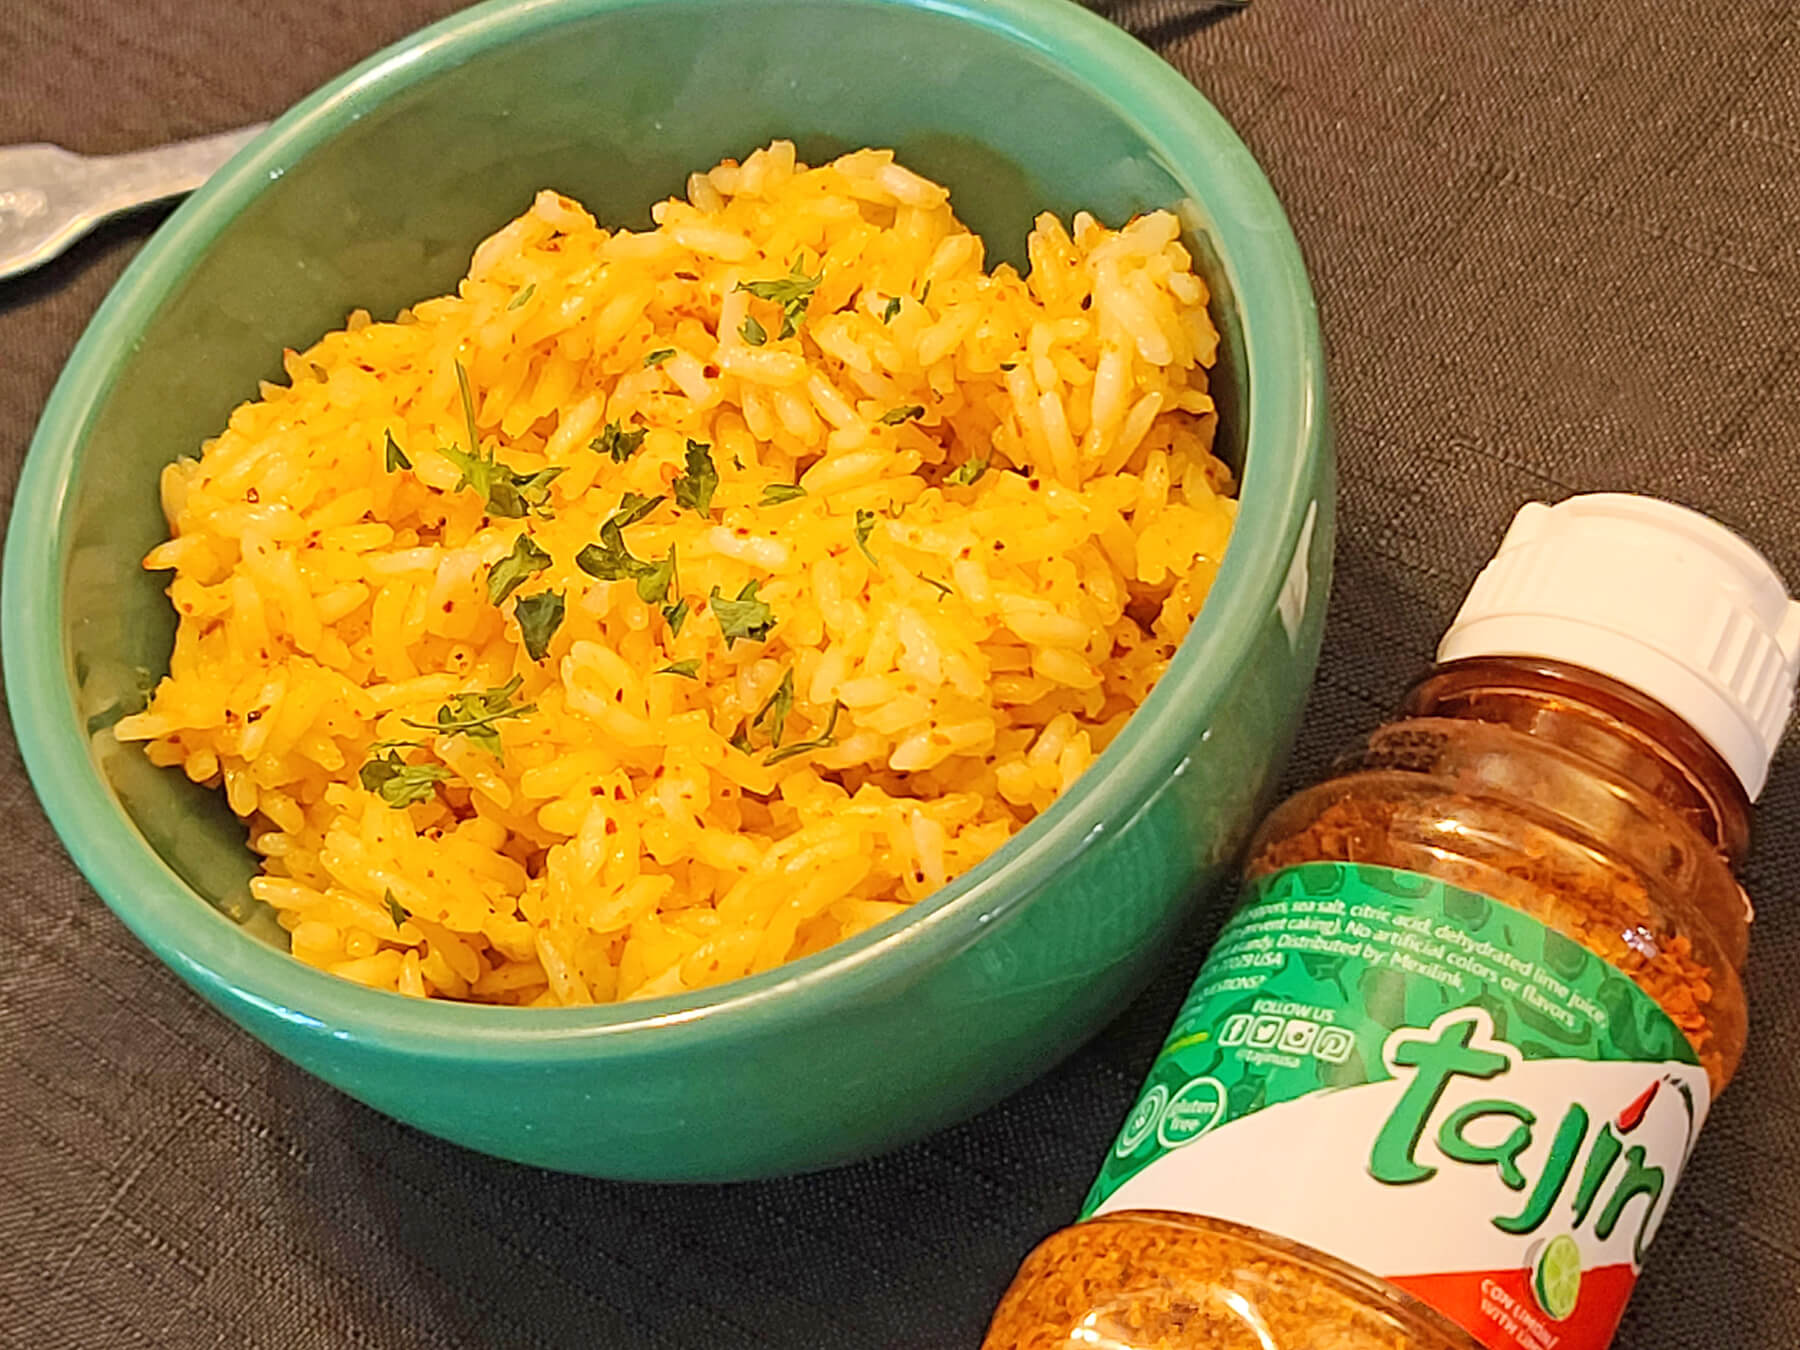 Tajin' up the flavor with yummy seasoned rice - Spice Up Your Life